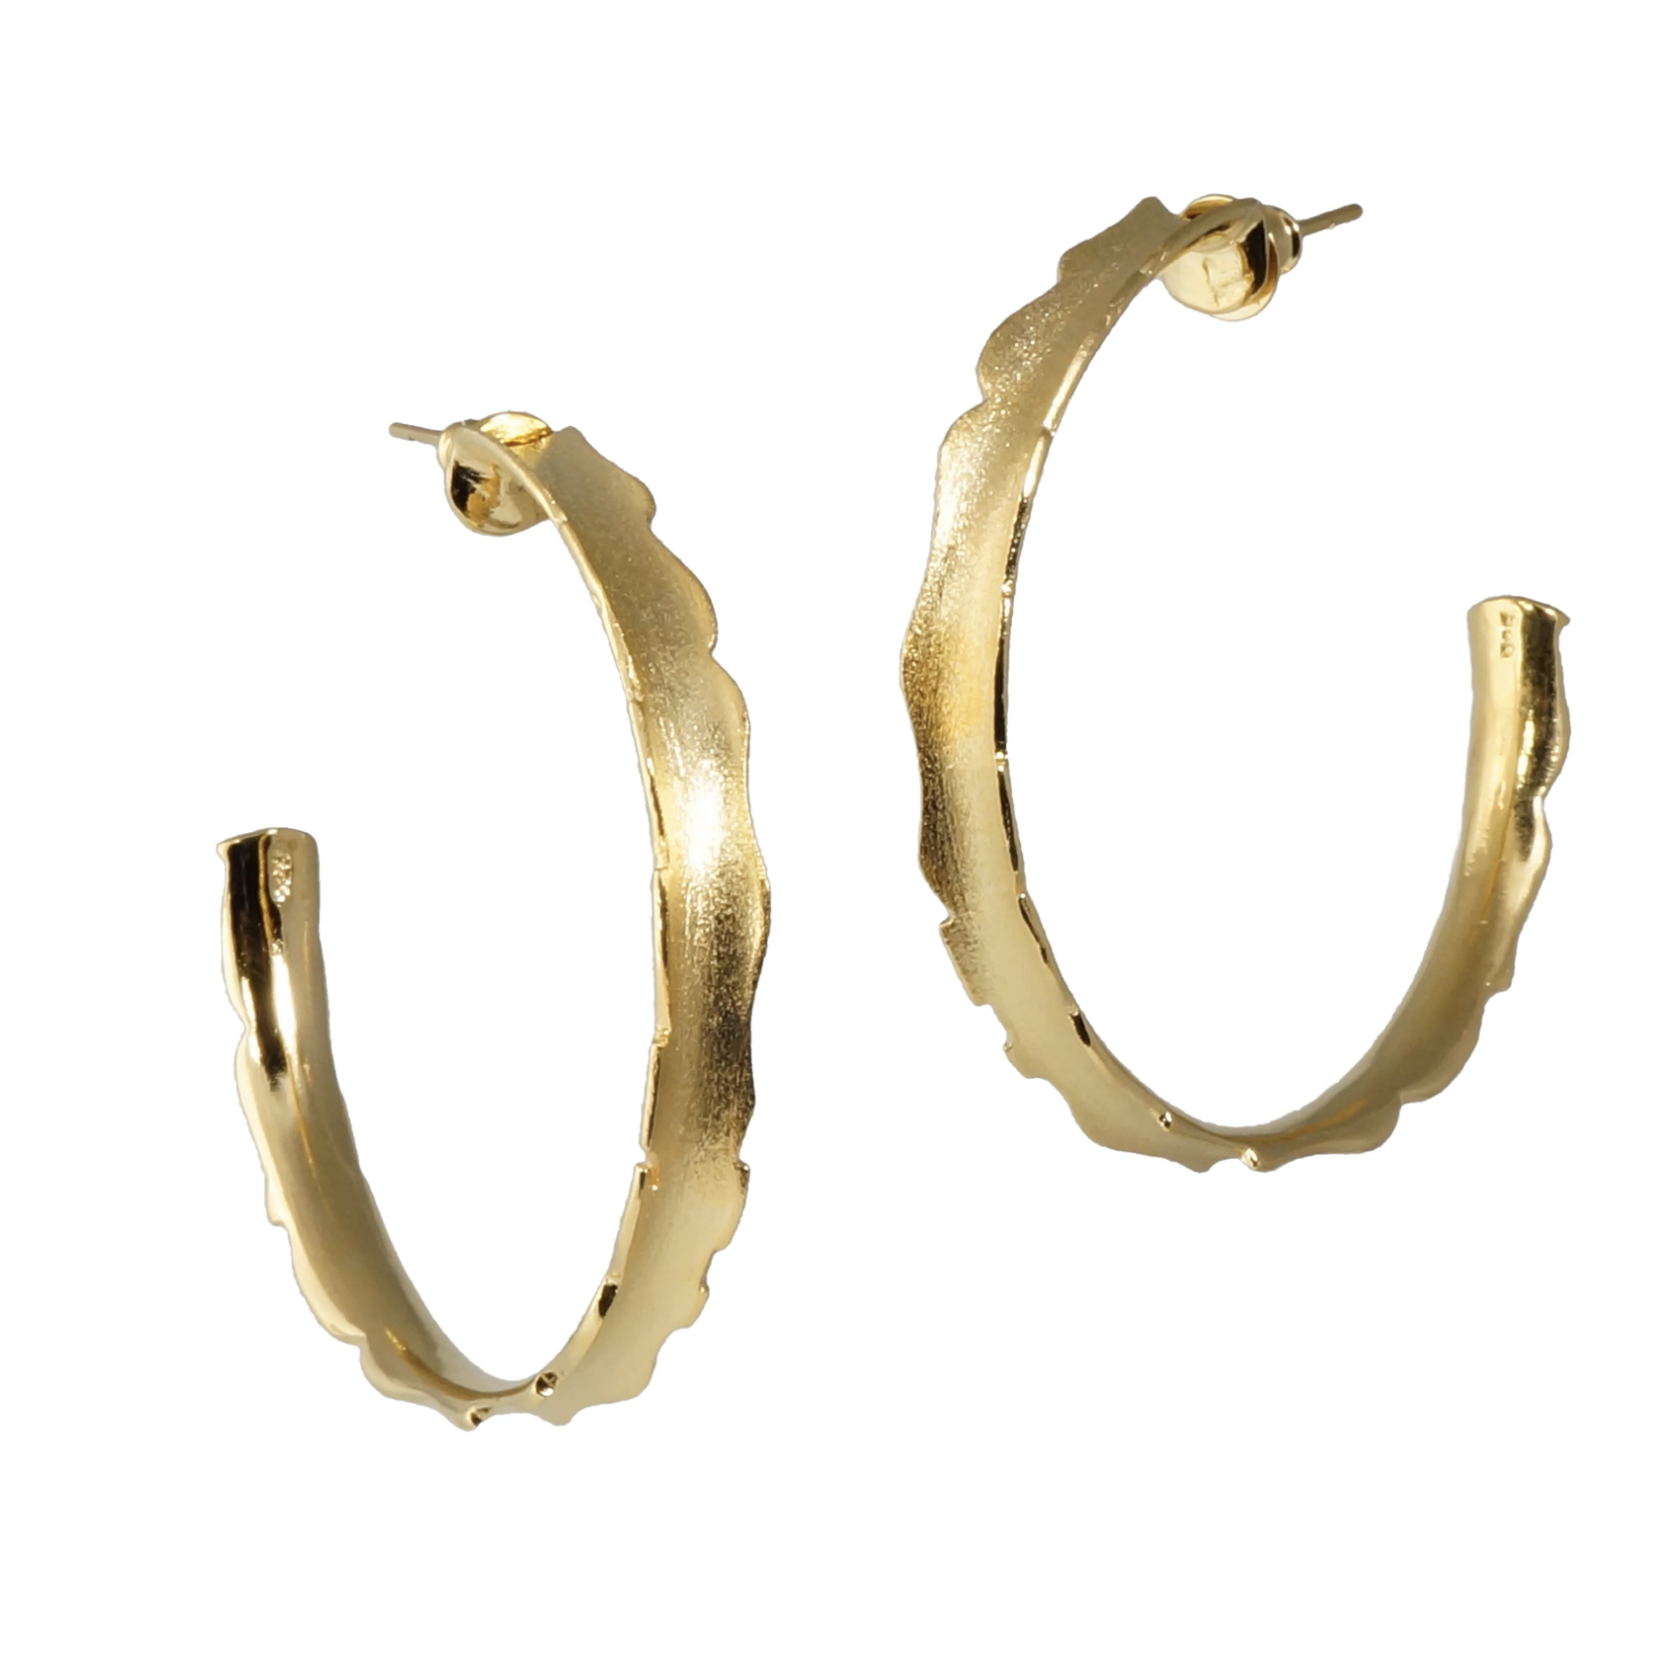 Unique Gold Hoop Earrings by Q Evon